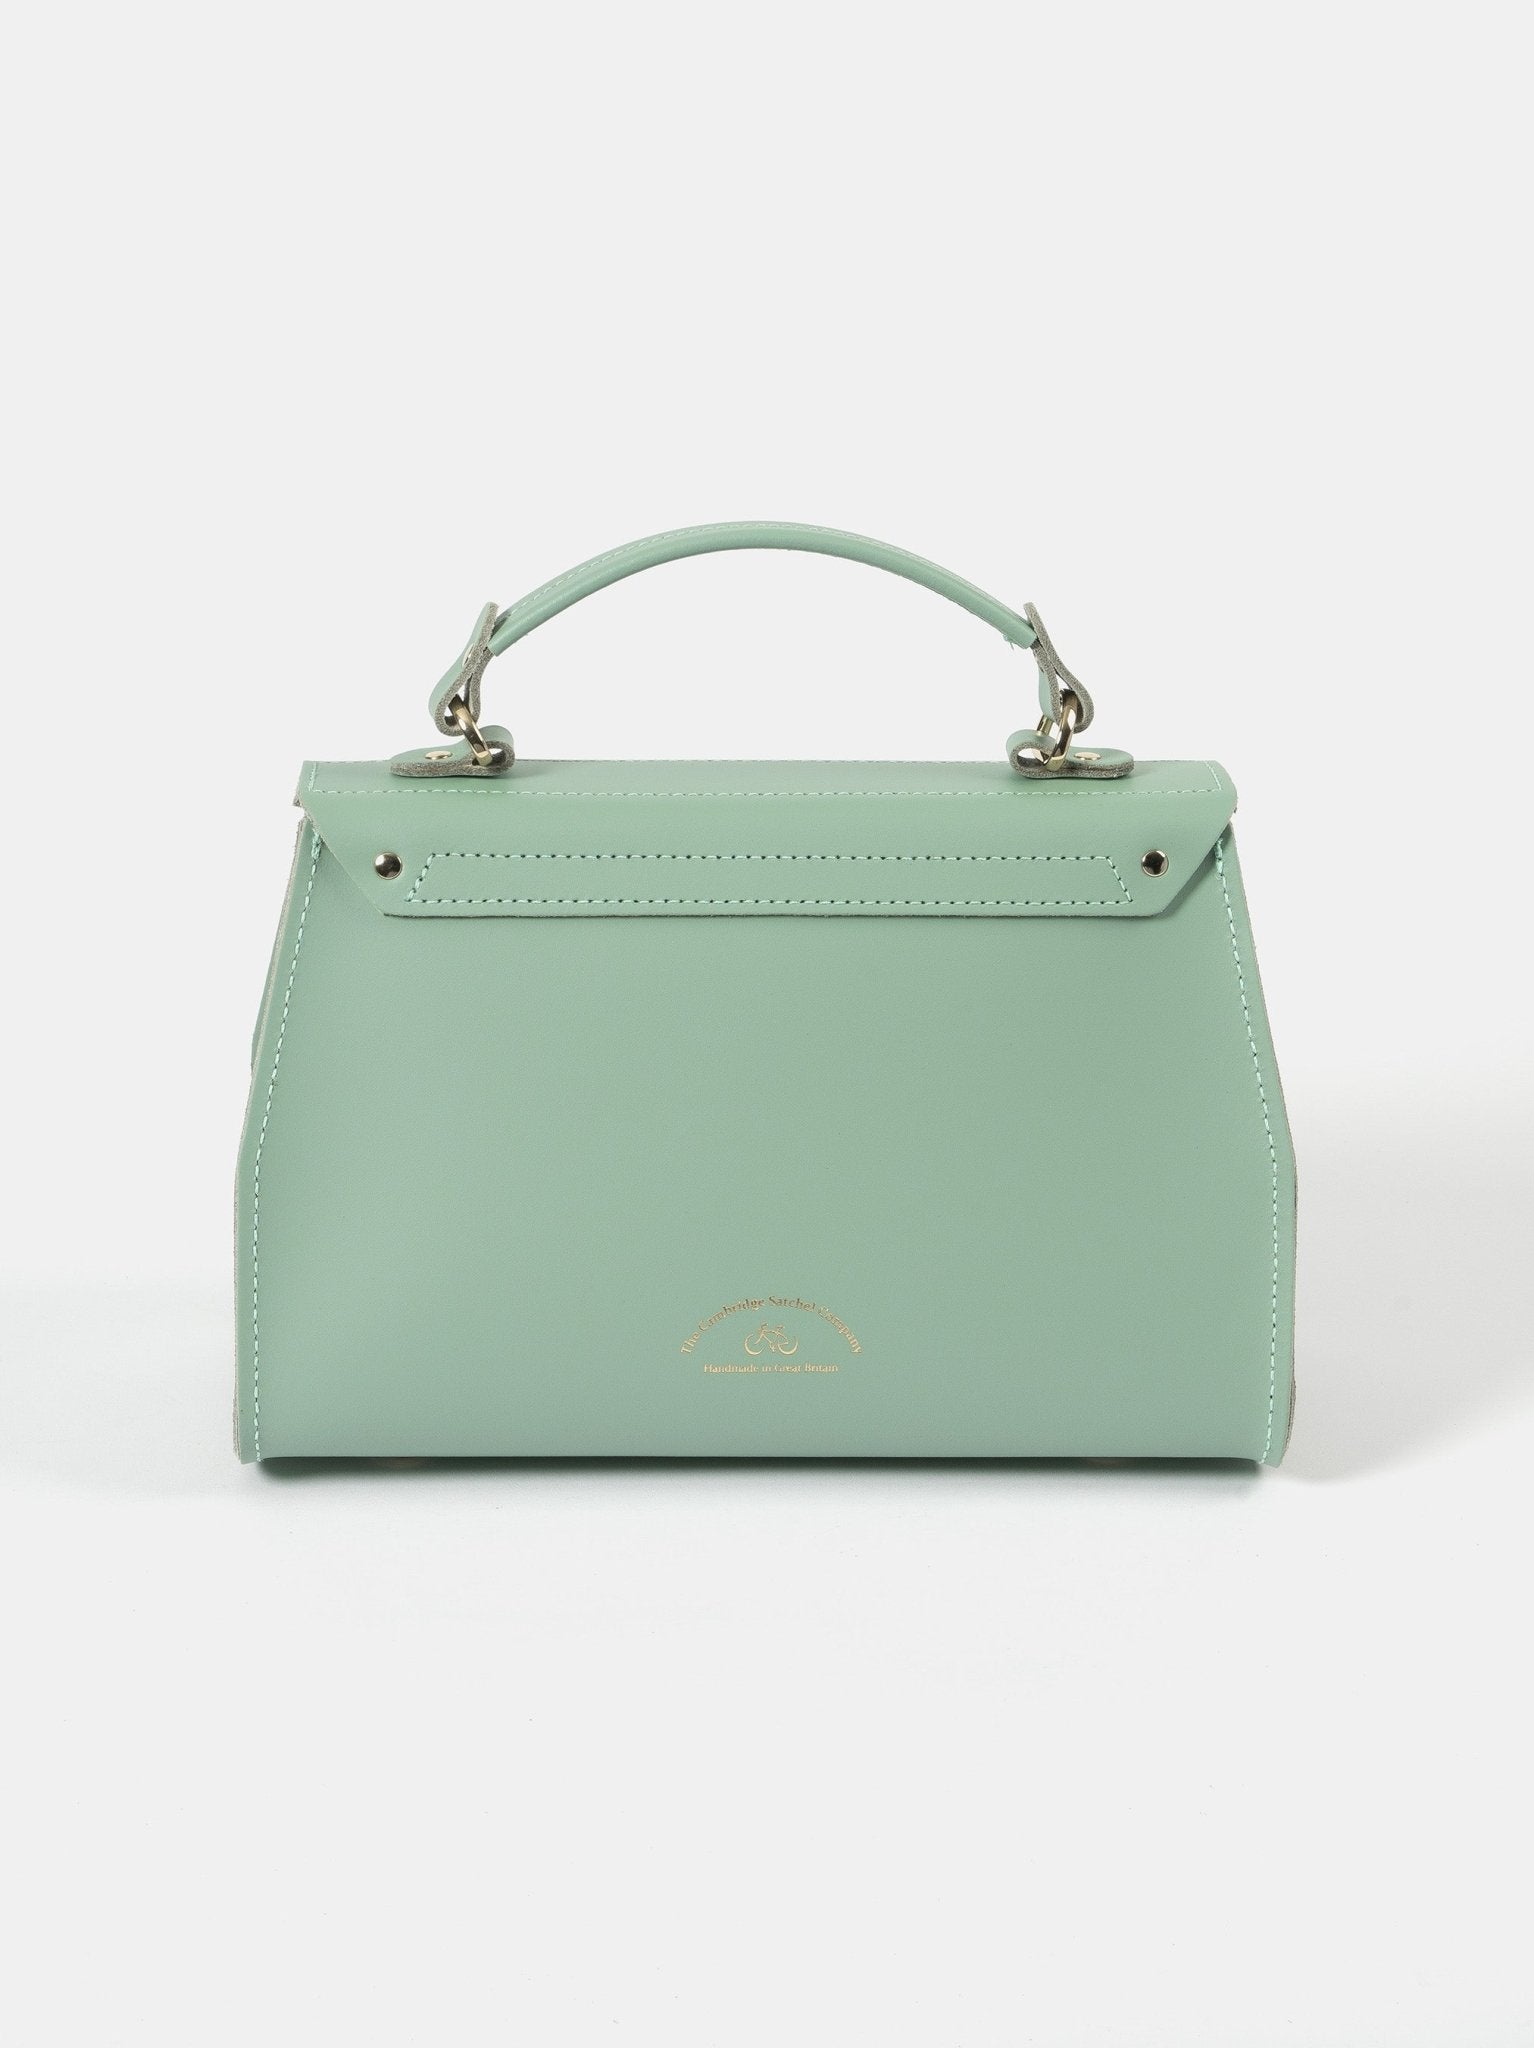 Daisy Bag in Leather - Oasis Green - The Cambridge Satchel Company UK Store